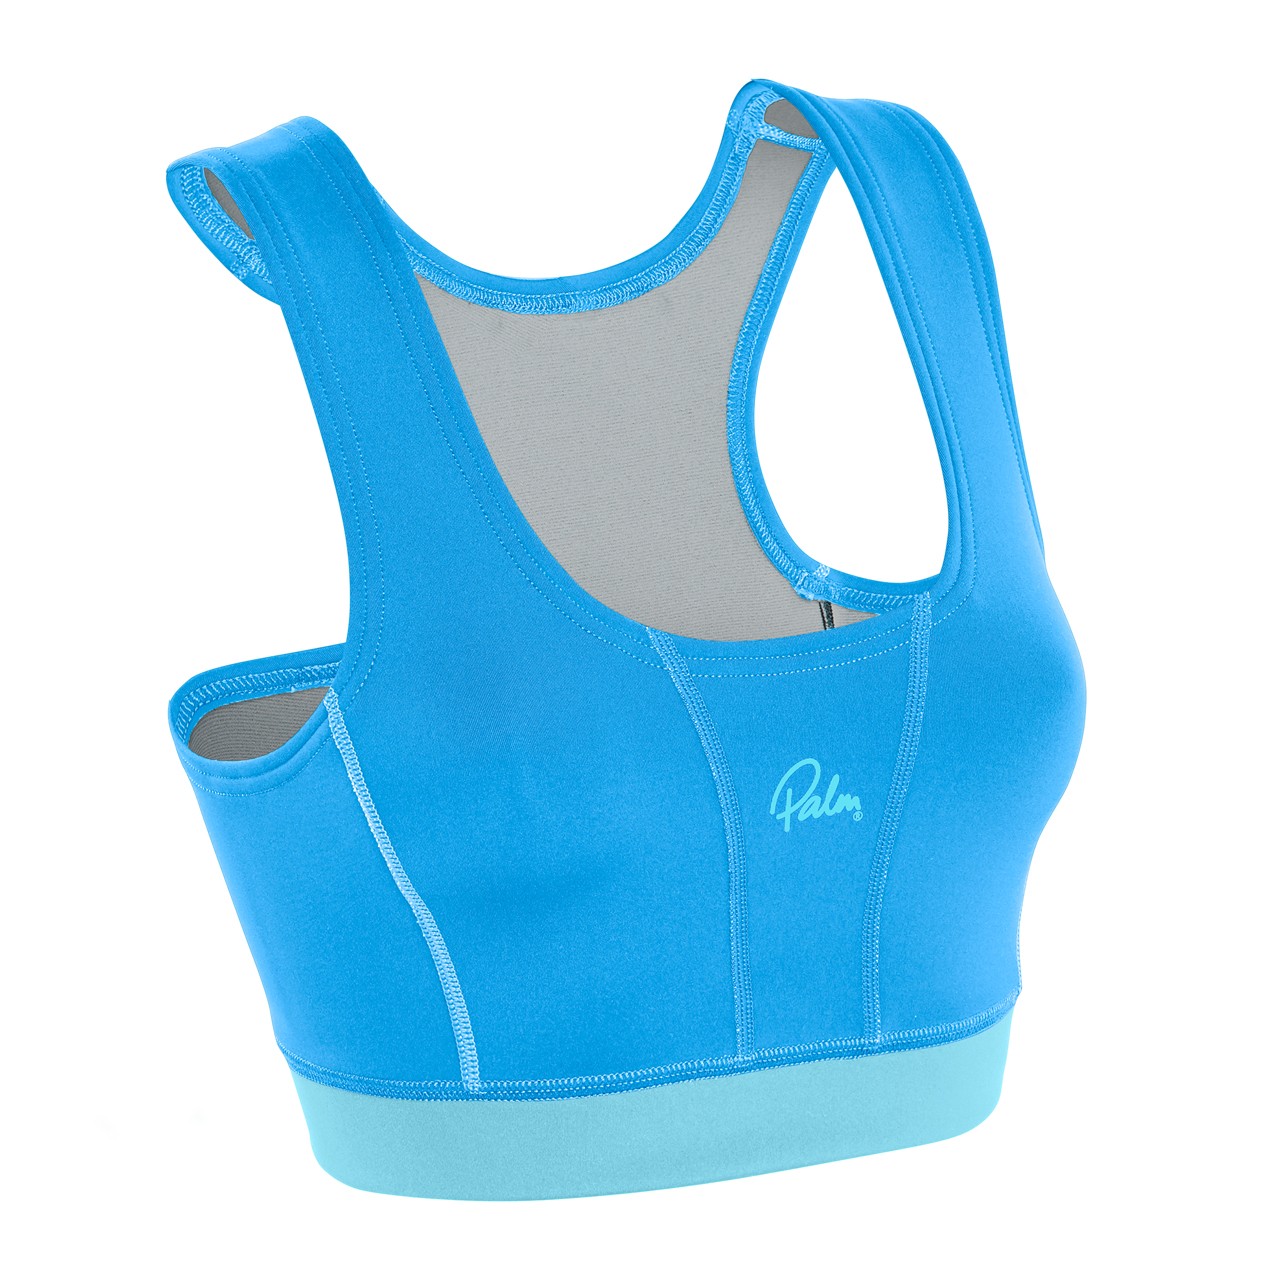 Palm Womens Neoflex Top